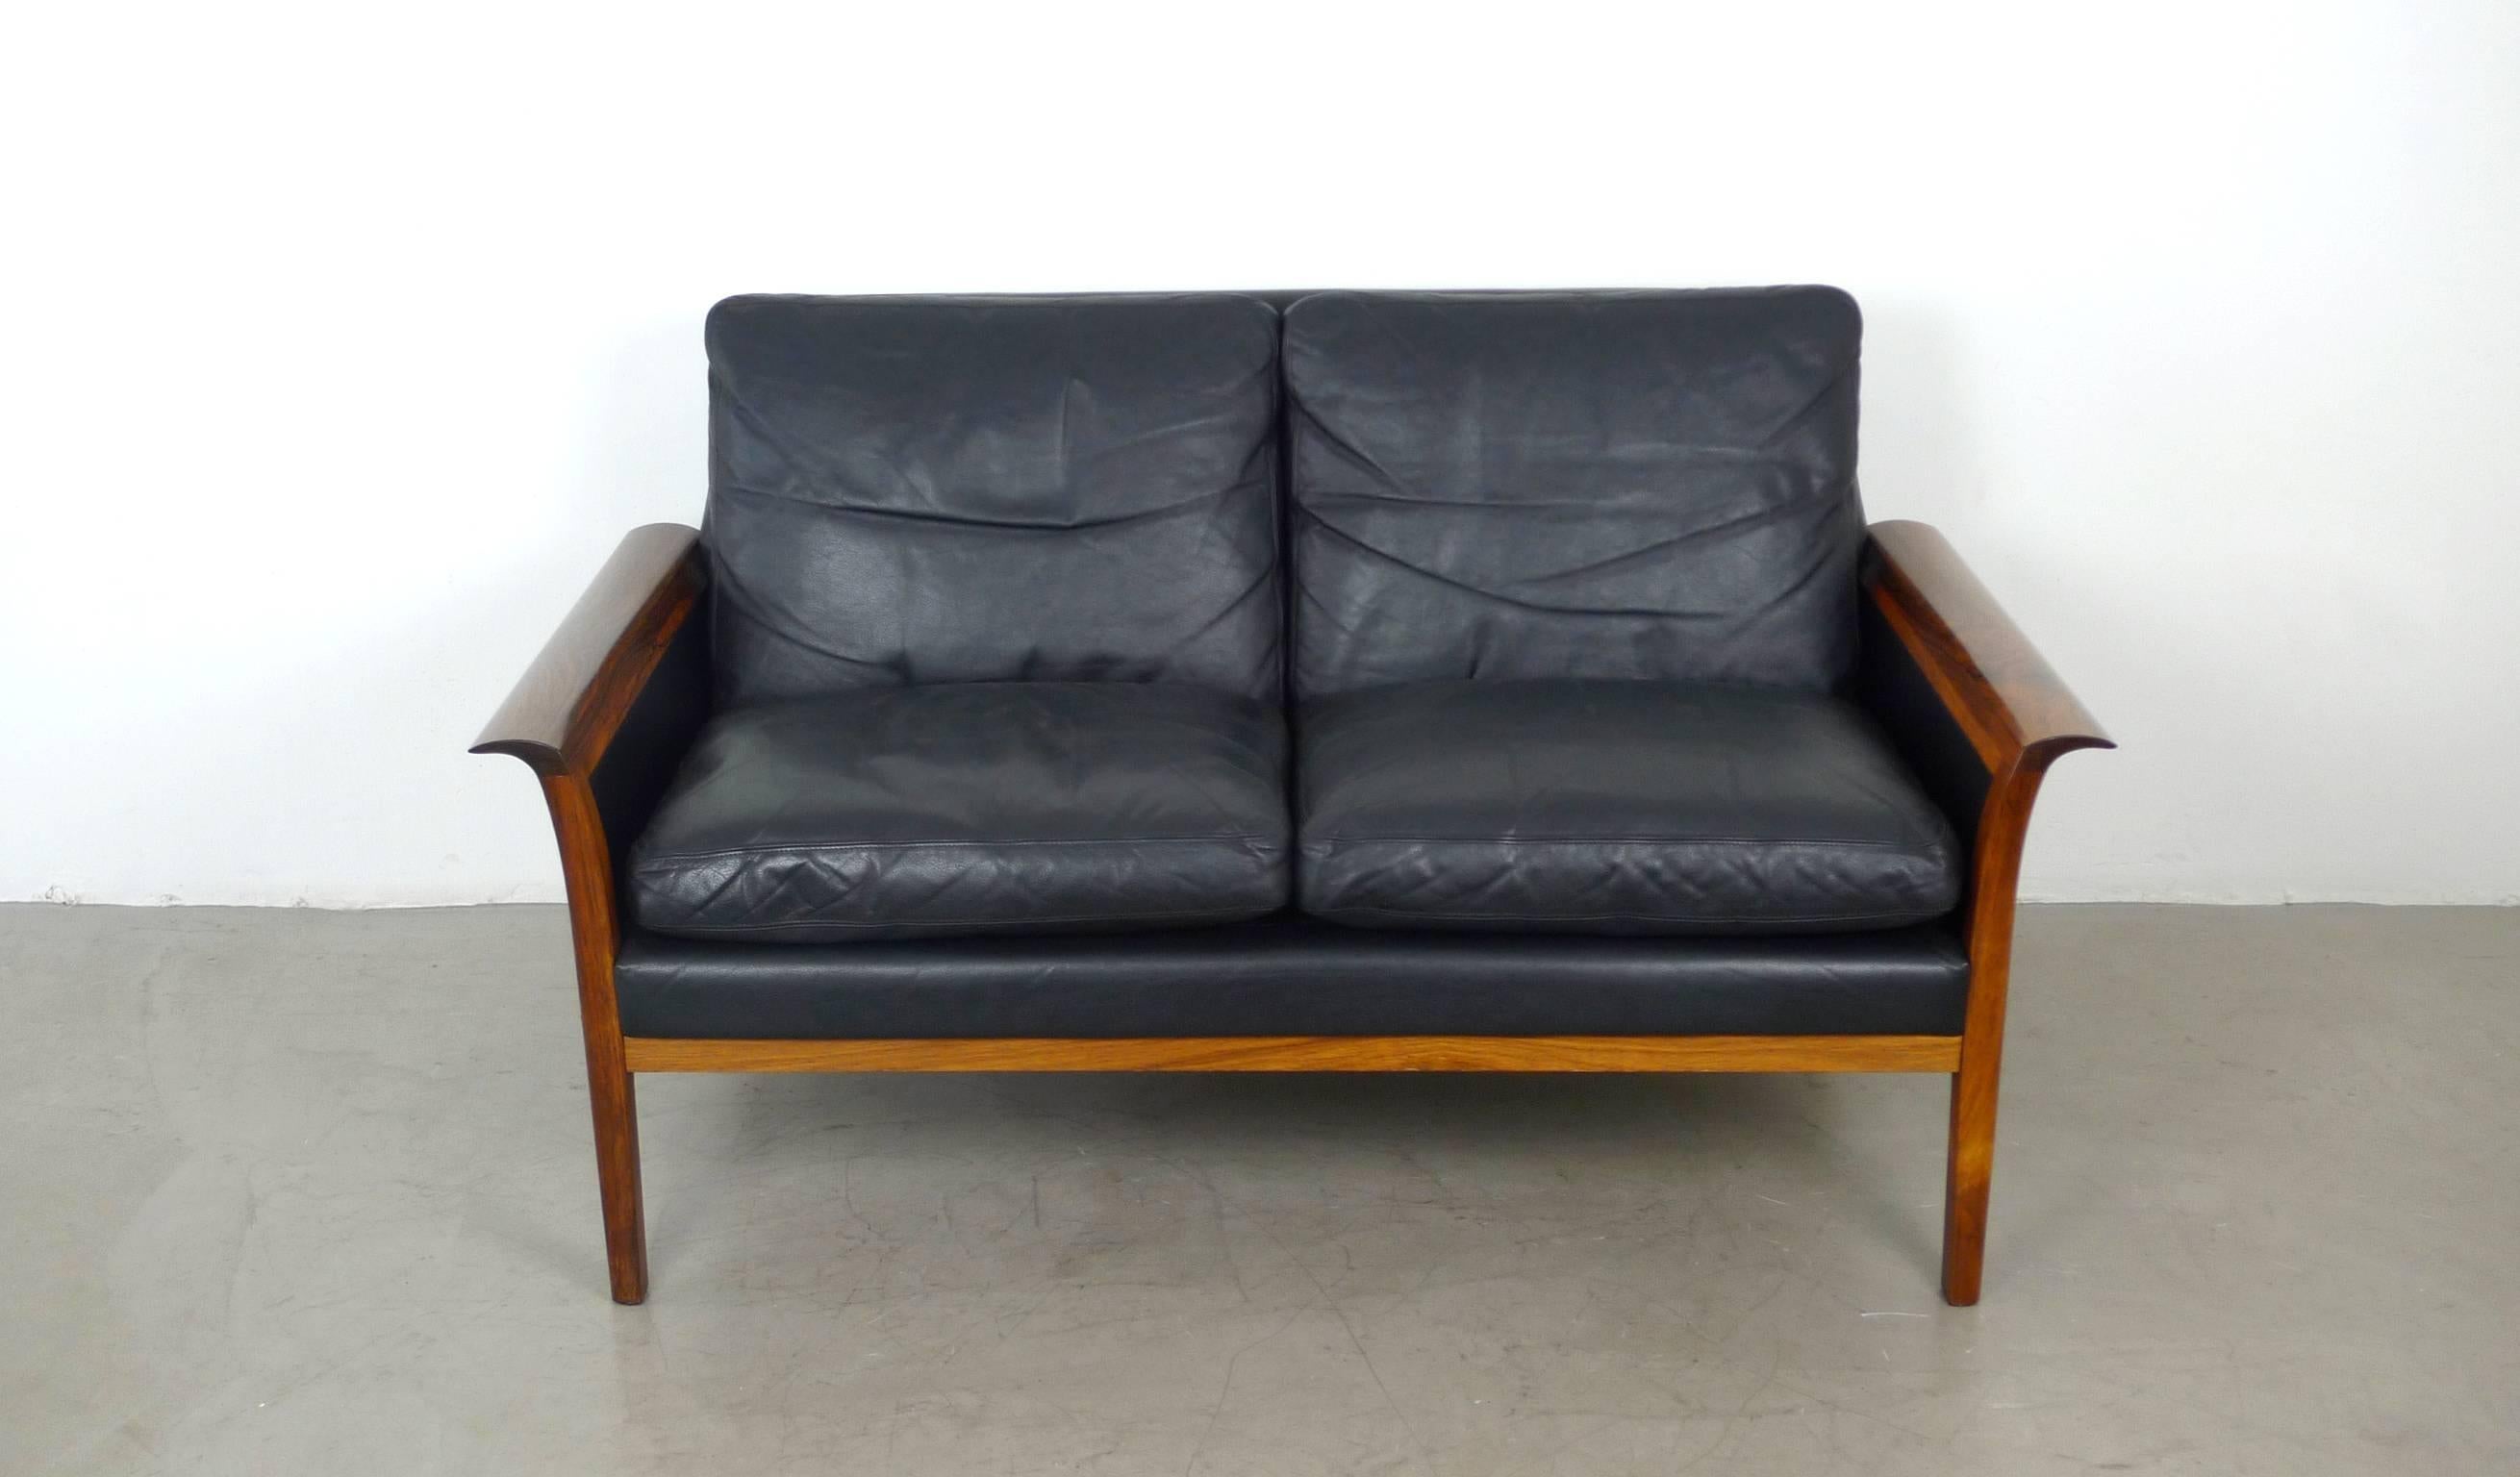 Elegant black leather sofa with rolling rosewood frame for two persons. All seat and backrest cushions are filled with down feathers for a soft and comfortable sitting. The frame of the left and the right side of the sofa is made of solid